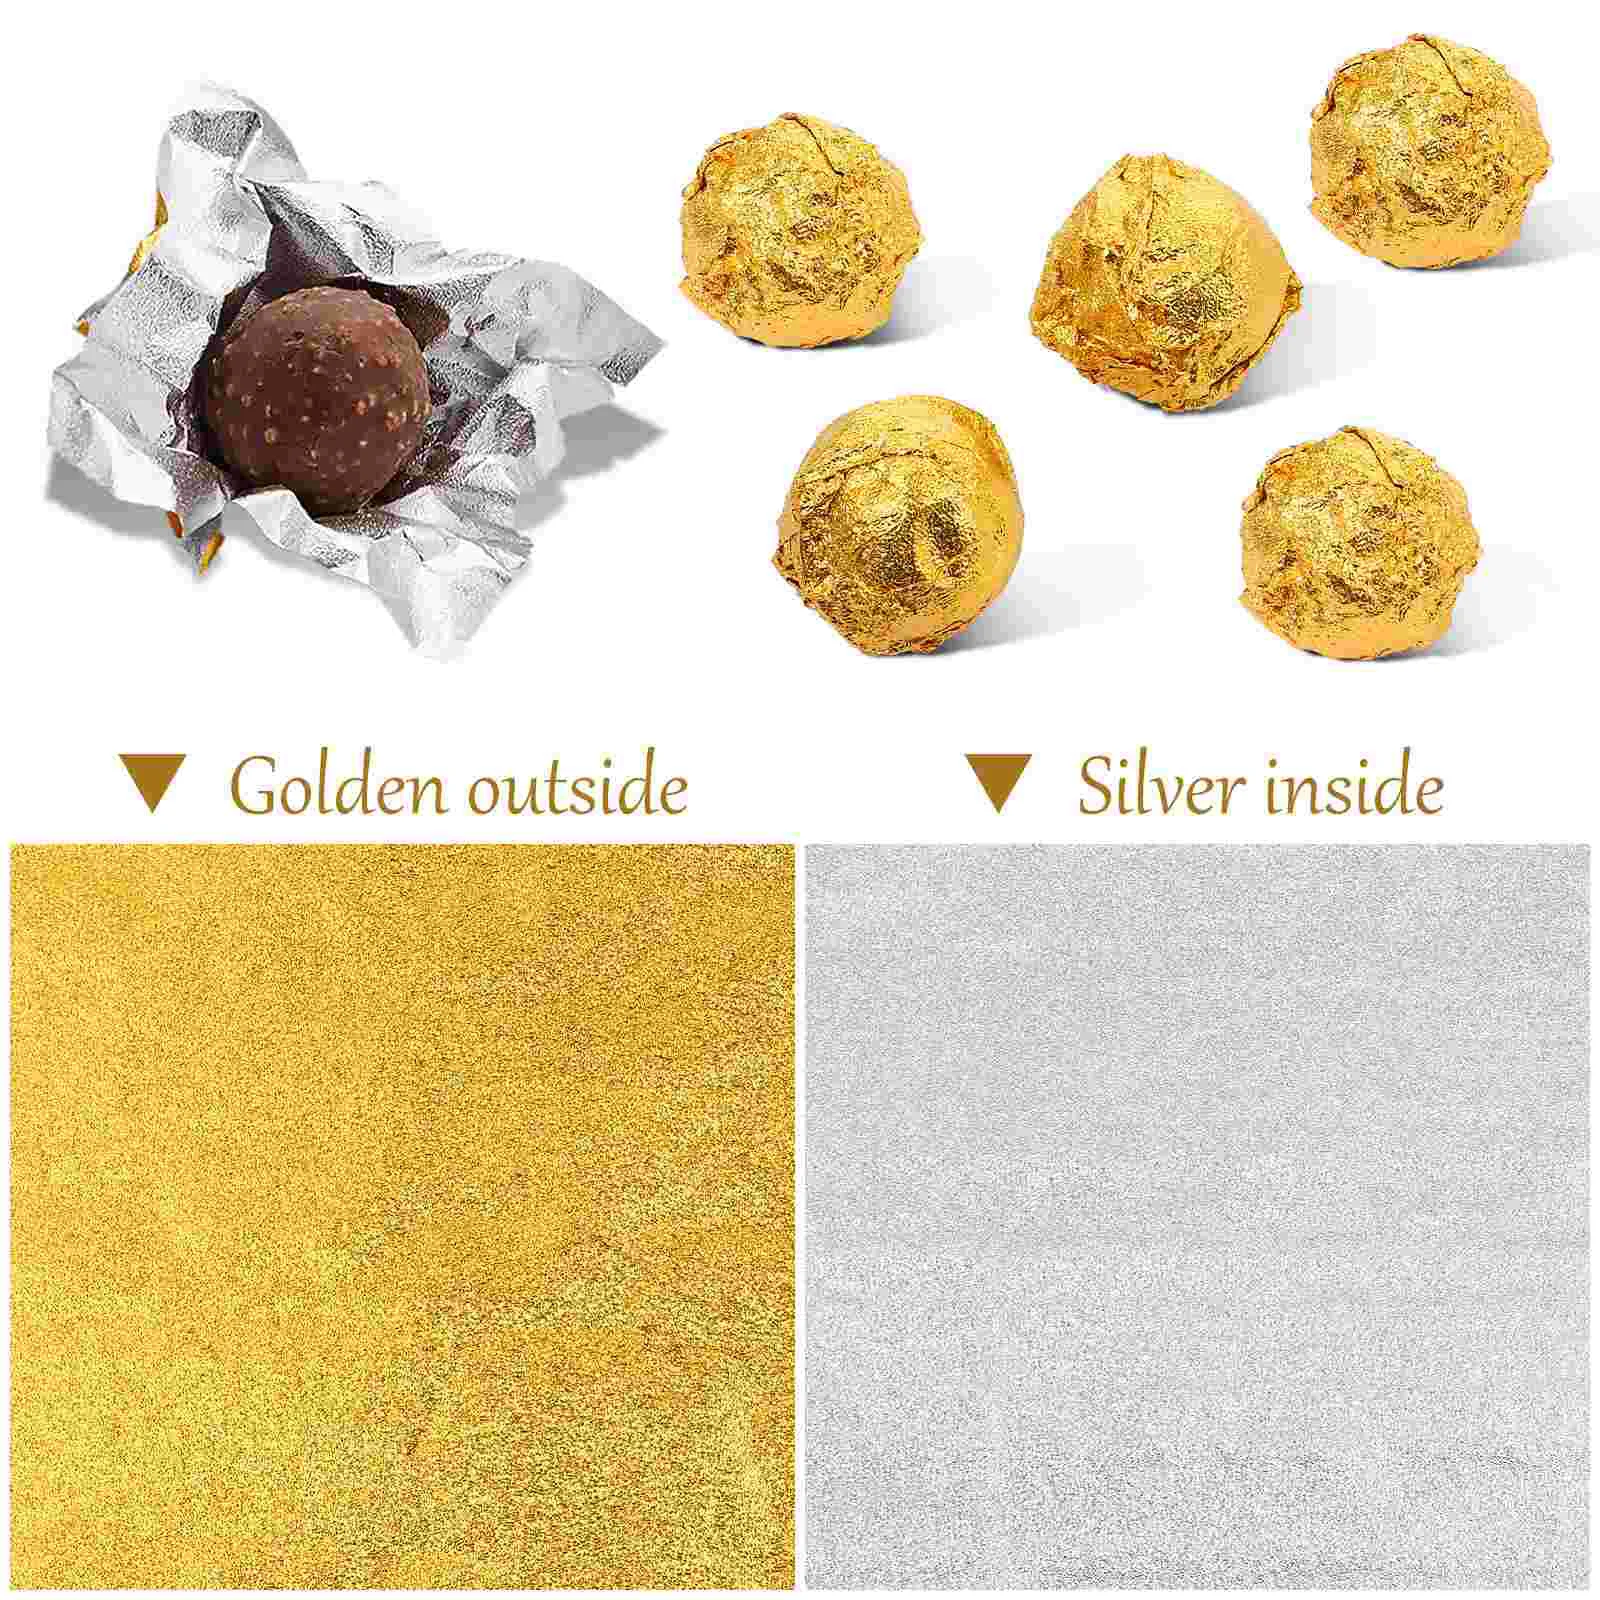 

200pcs Foil Chocolate Wrappers Candy Packaging Wrappers Aluminium Foil Chocolate Wrapping Papers